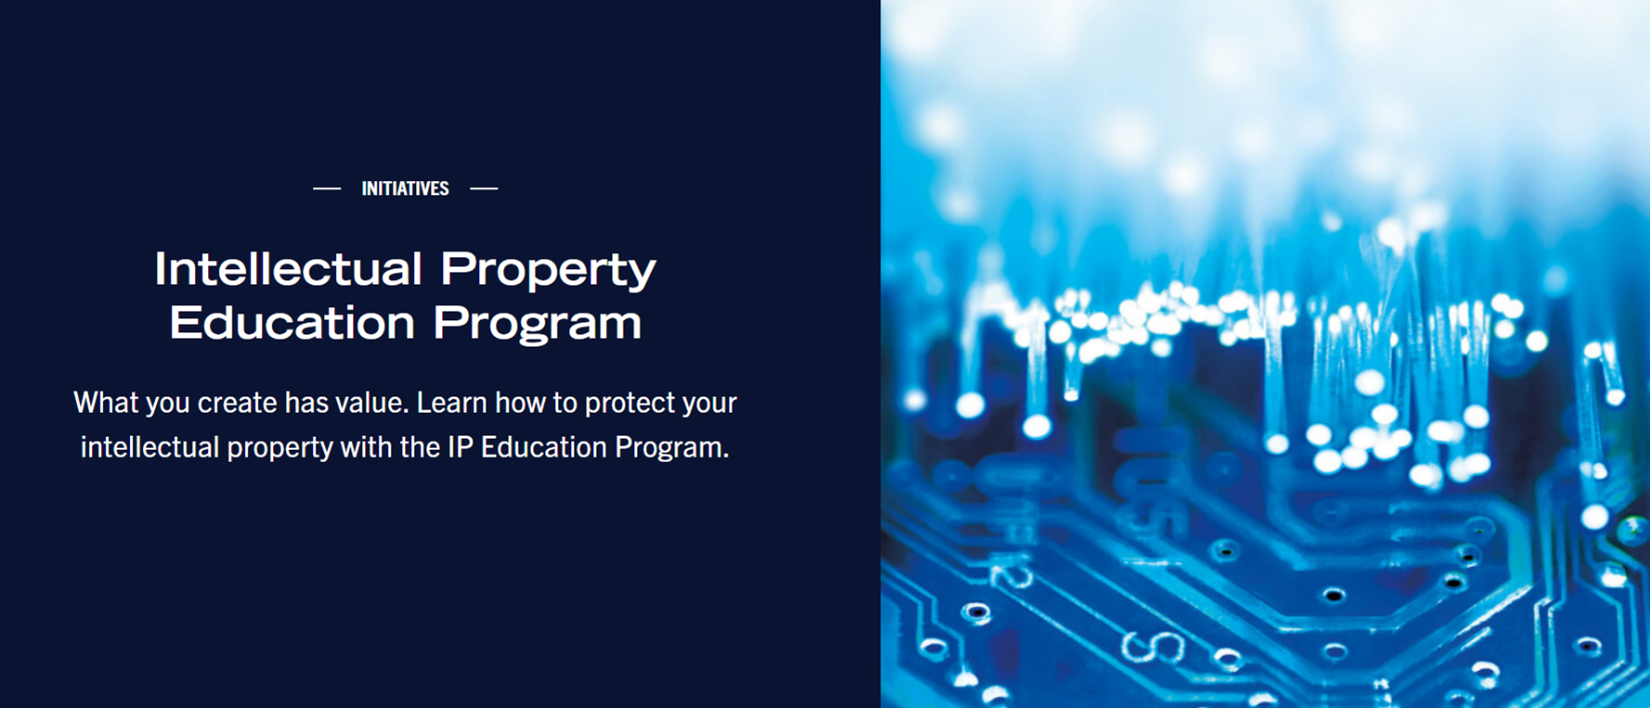 Decorative image of the home page of the U of T IP Education Program